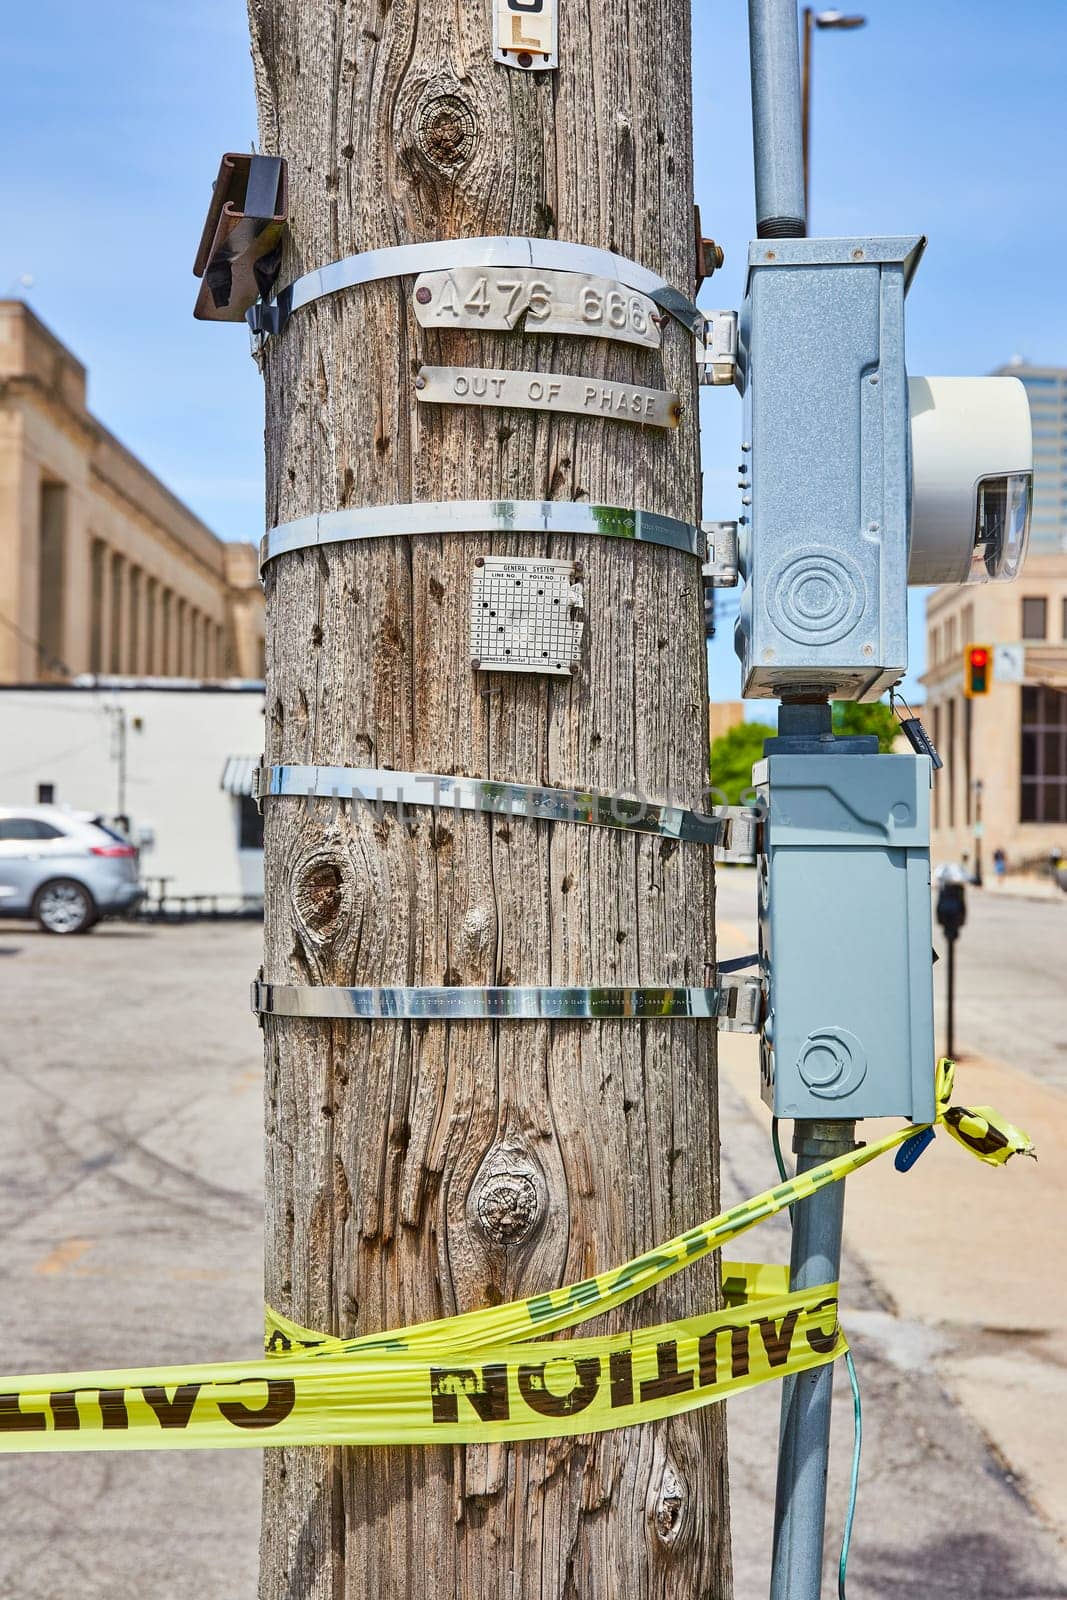 Sunlit utility pole in Fort Wayne, adorned with caution tape, an electrical box, and a traffic camera.